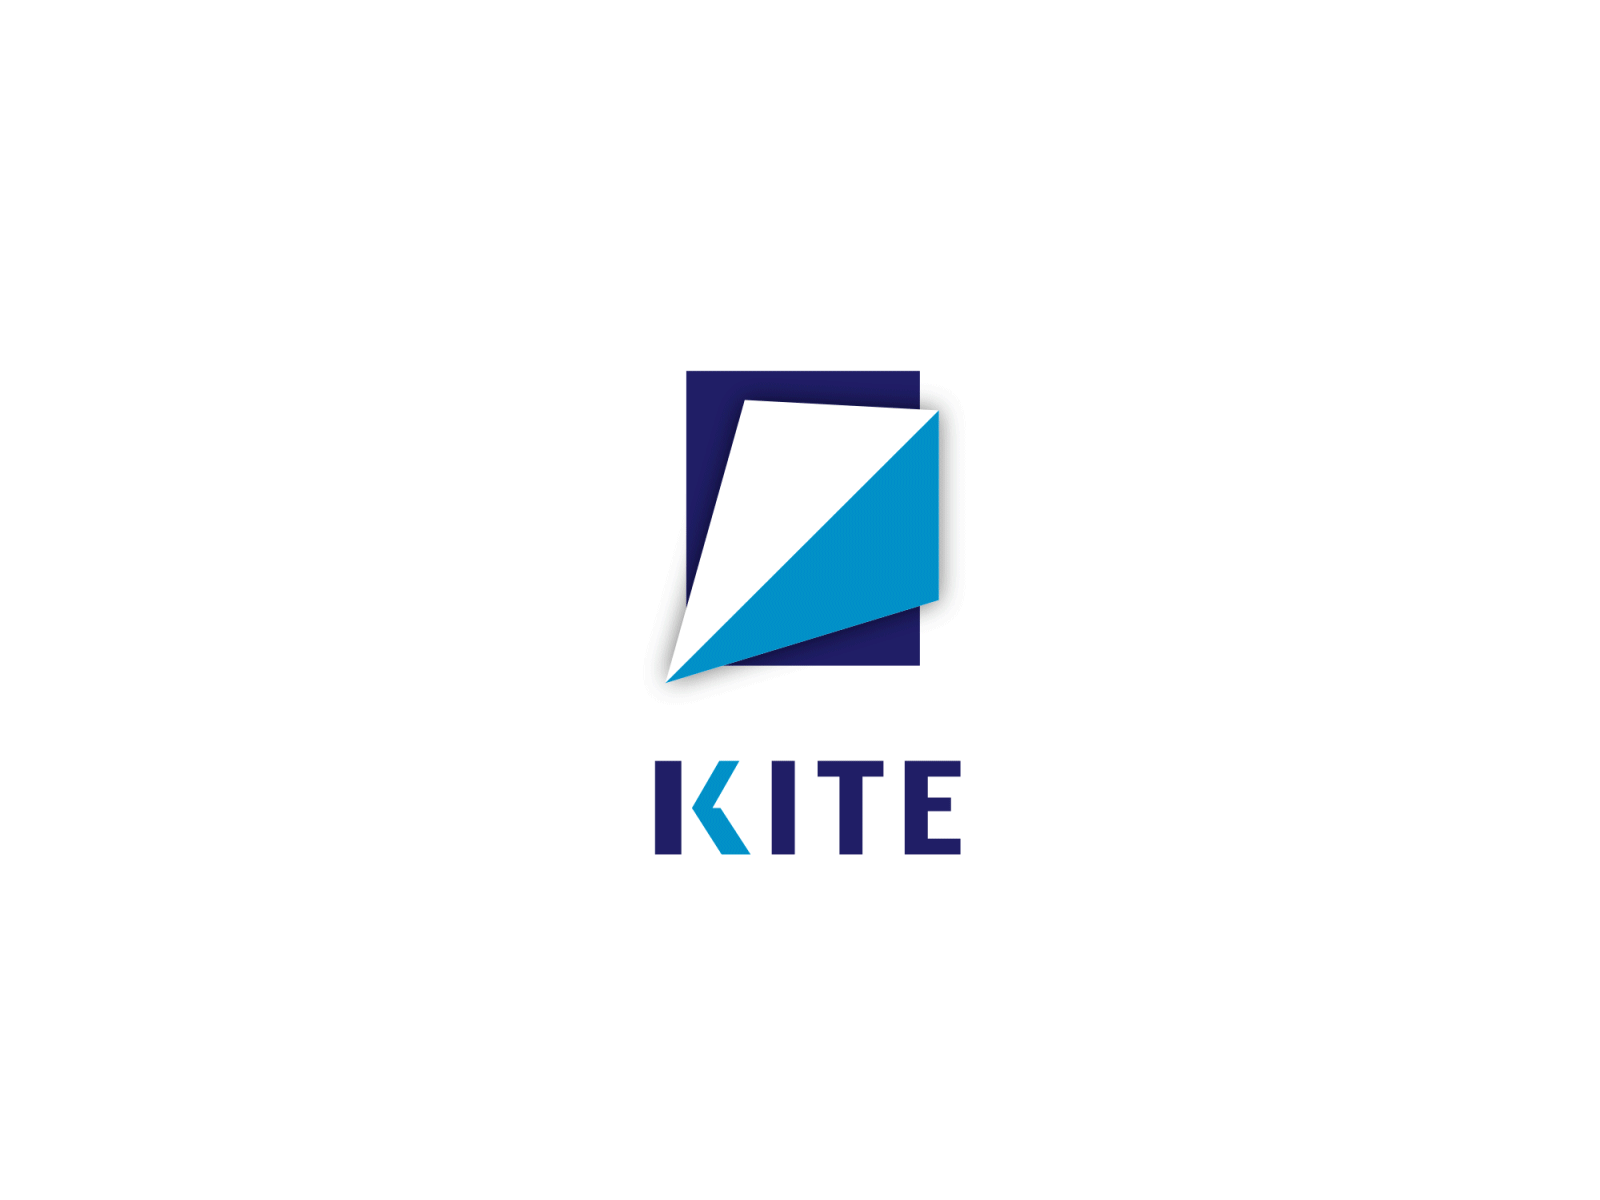 Kite logo animation 3d 3d animation after effect animation gif kite logo animation logo reveal looped